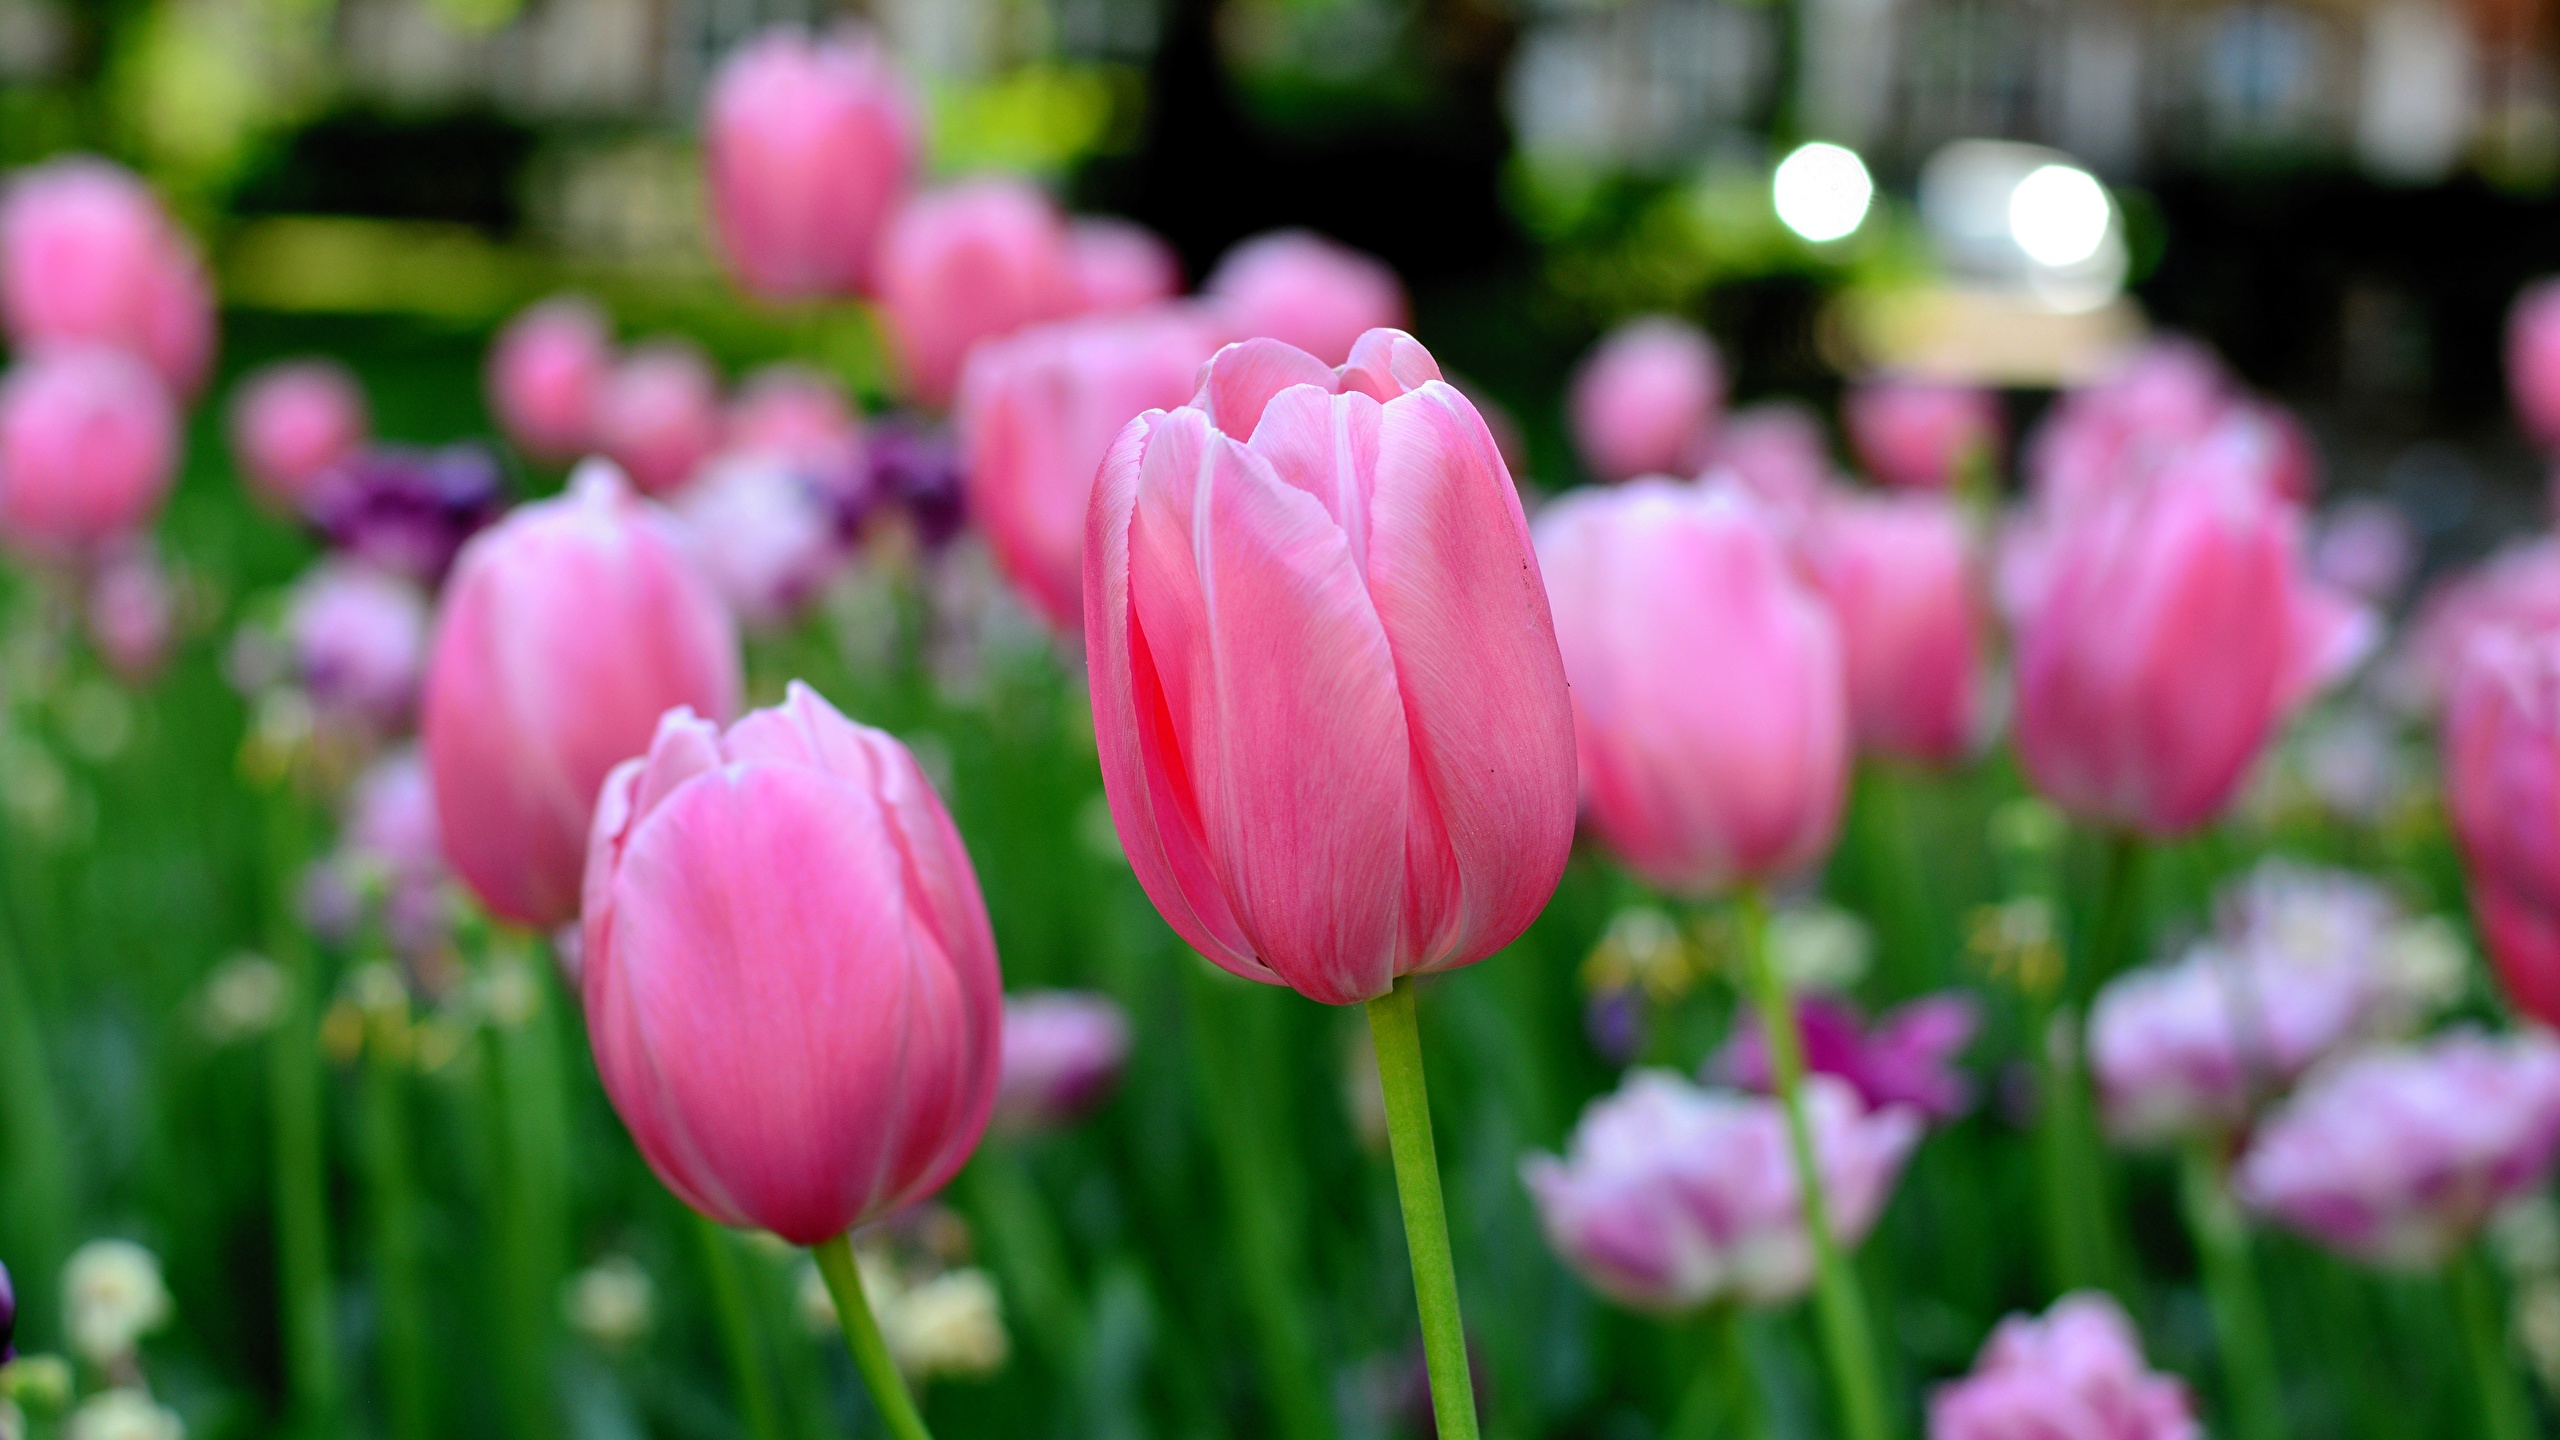 Images blurred background Tulips Pink color flower 2560x1440